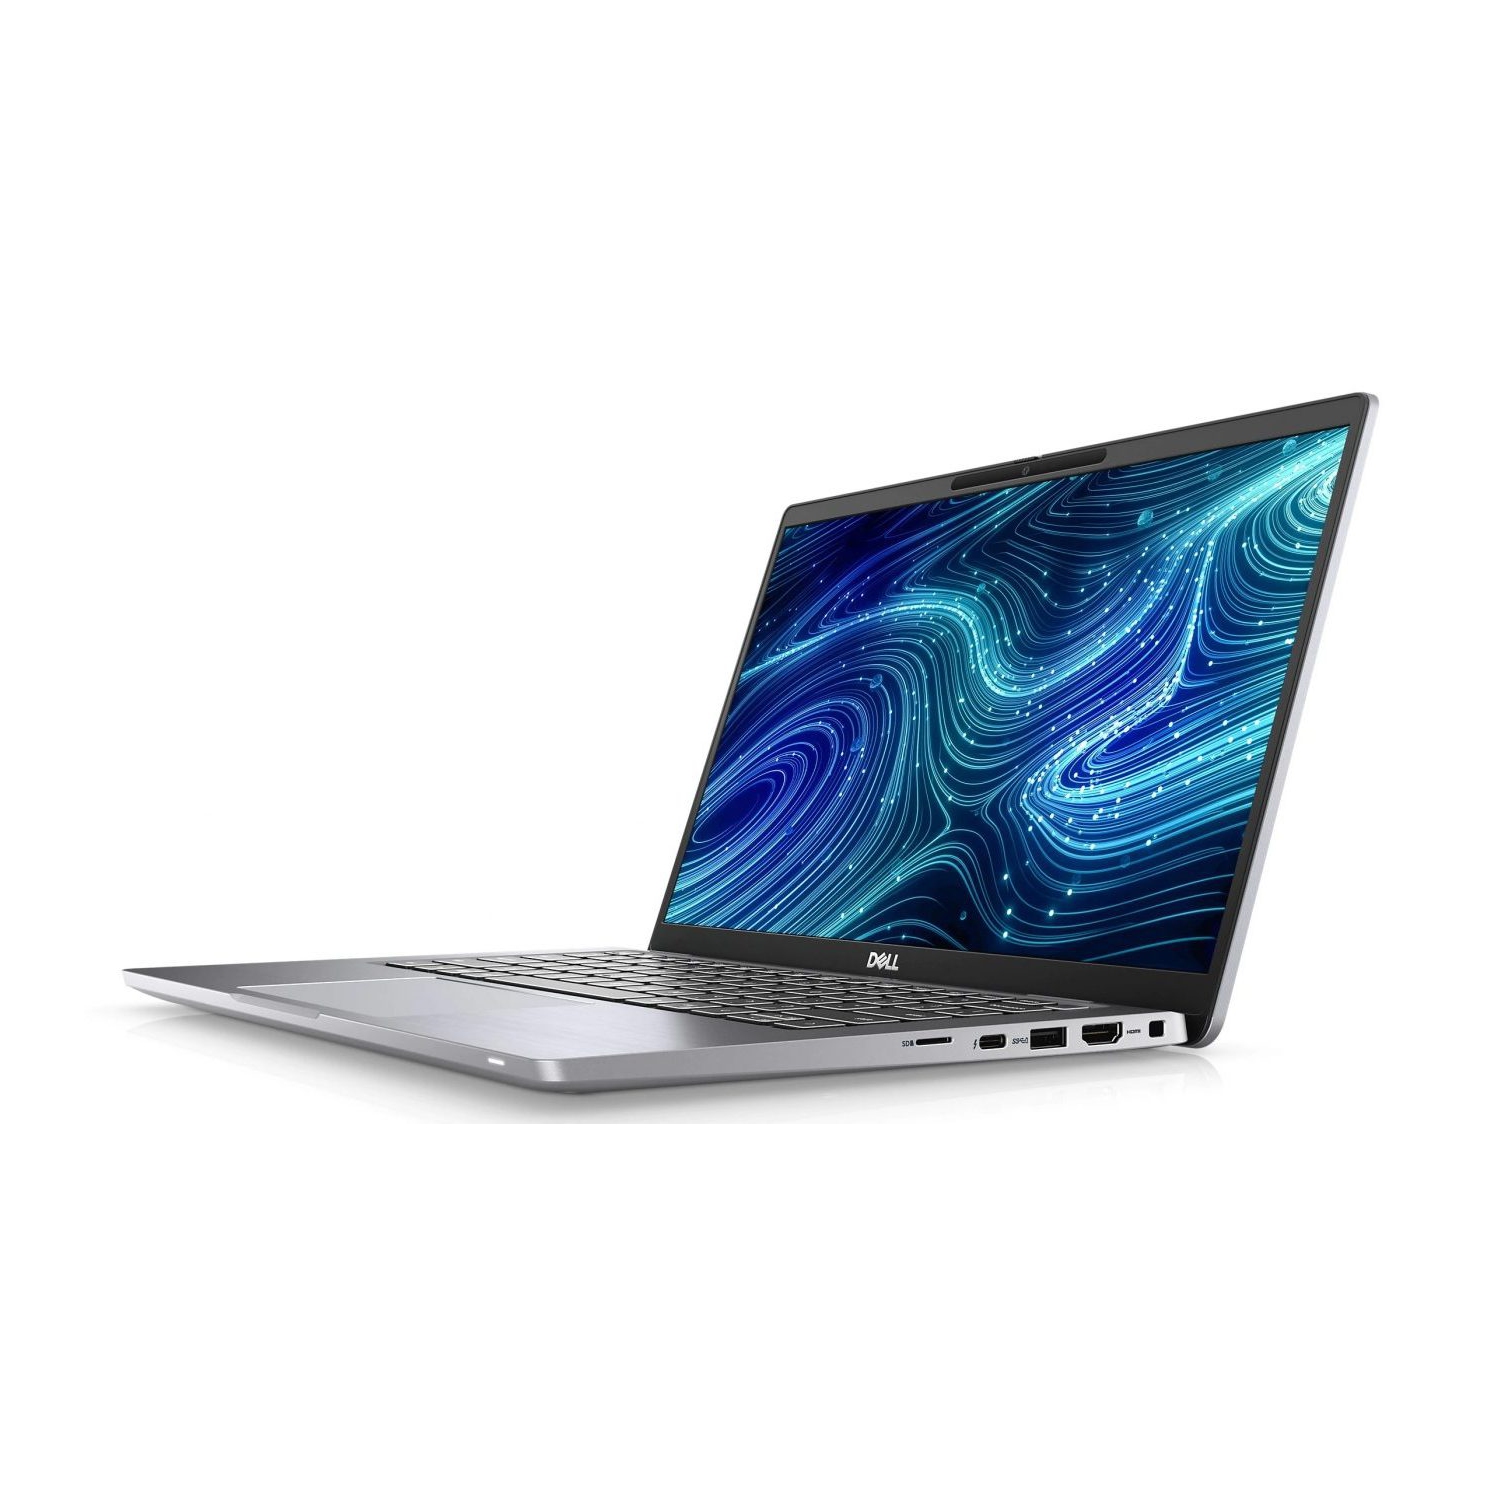 Refurbished (Excellent) - Dell Latitude 7000 7420 Laptop (2021) | 14" FHD | Core i7 - 512GB SSD - 16GB RAM | 4 Cores @ 4.7 GHz - 11th Gen CPU Certified Refurbished